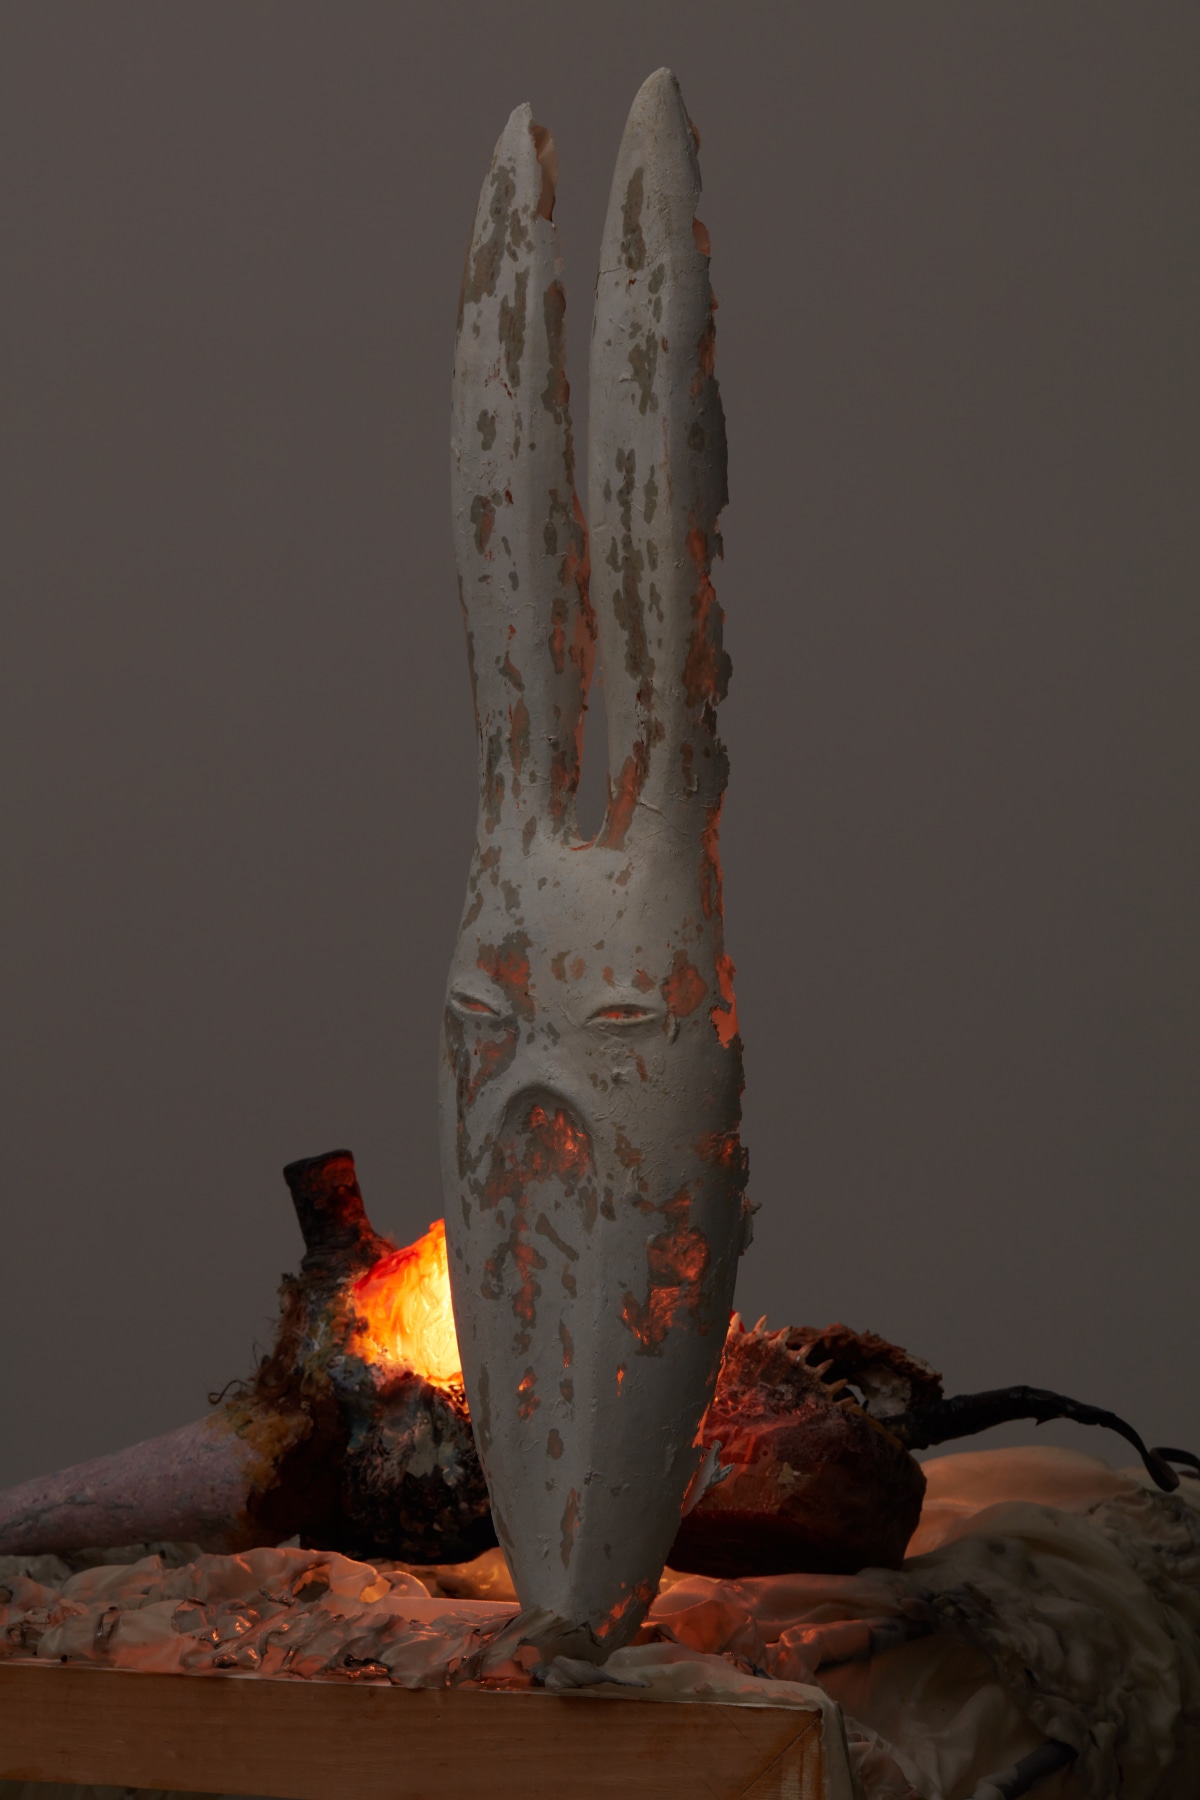 Catalina Ouyang, Happening, detail, 2022 burned fabric, resin, steel, wood, angle grinder, beeswax, found textiles, epoxy clay, wire mesh, plaster, papier mache, light, horse hair, turtle shell 44 7/8 x 31 x 28 3/4 in (114 x 78.7 x 73 cm)